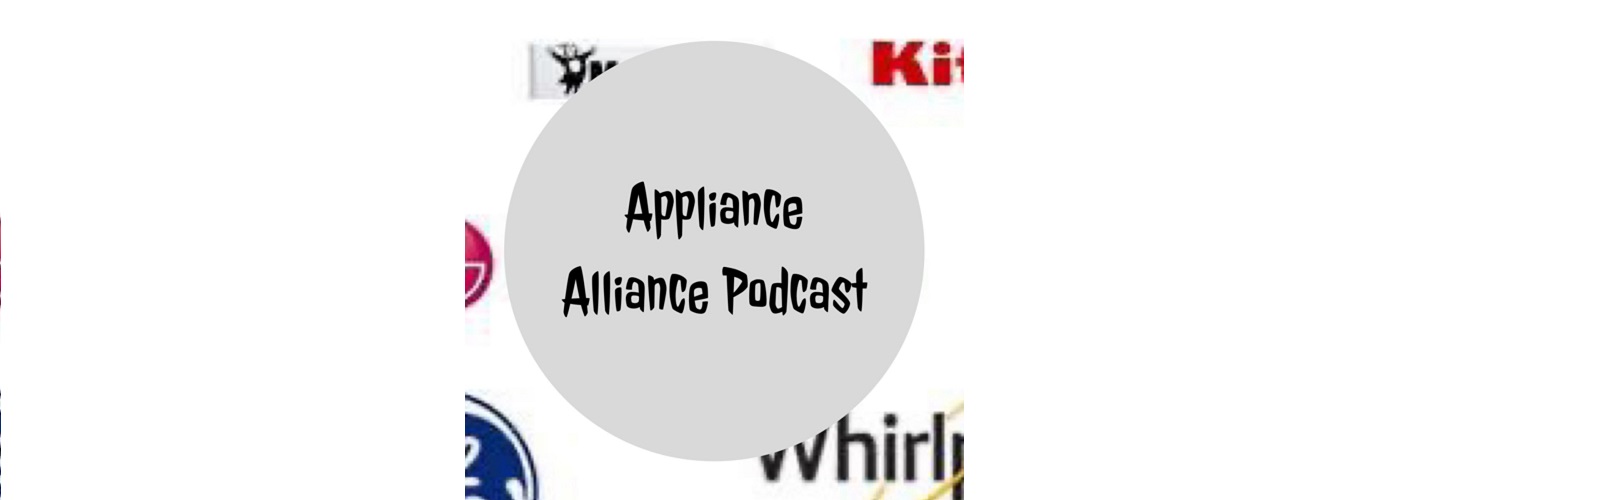 The Appliance Alliance Podcast